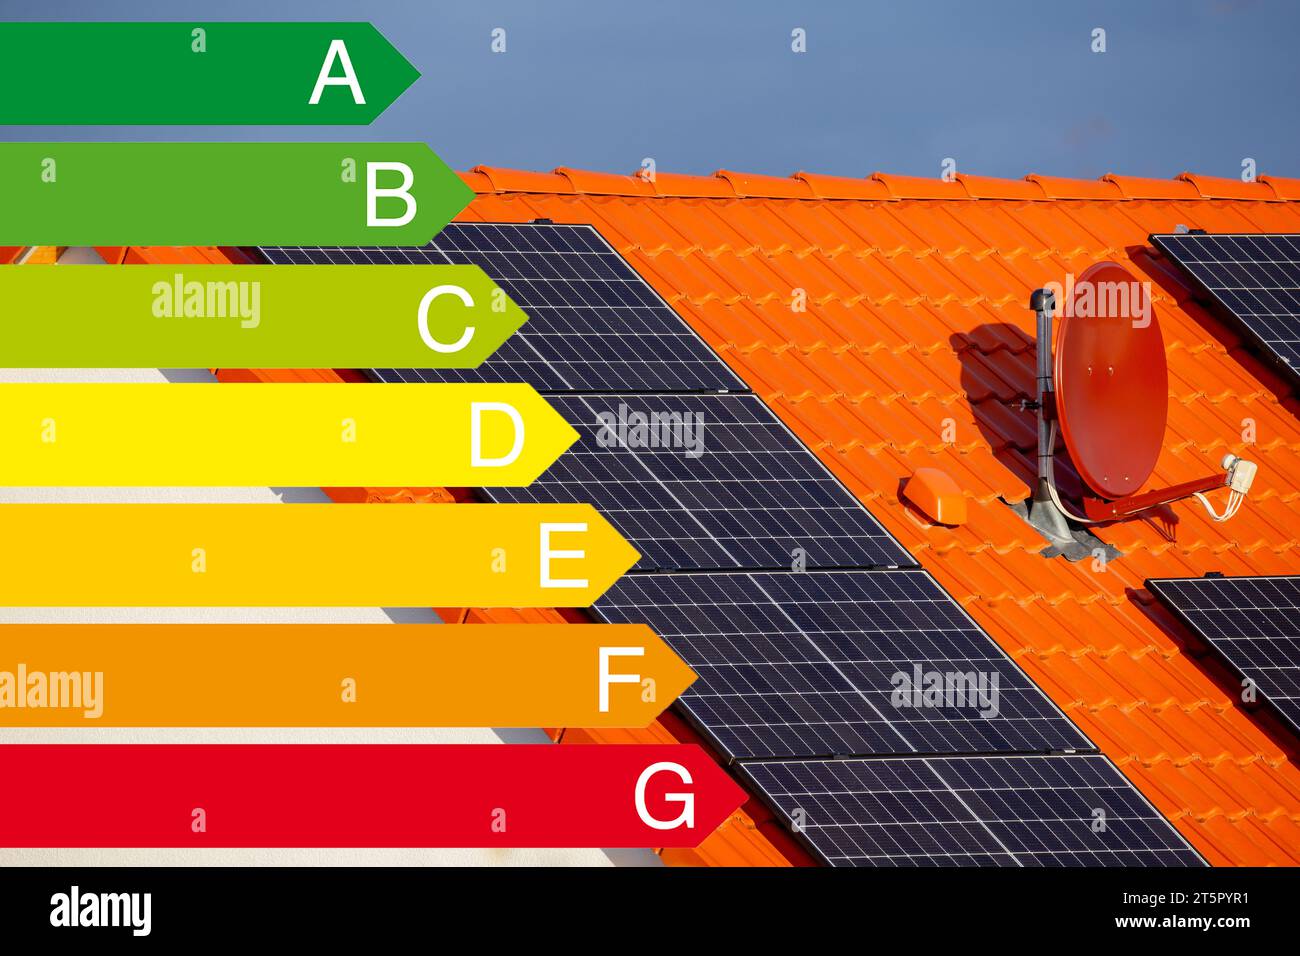 Solar roof (photovoltaic system) on a detached house with the European Union energy label Stock Photo